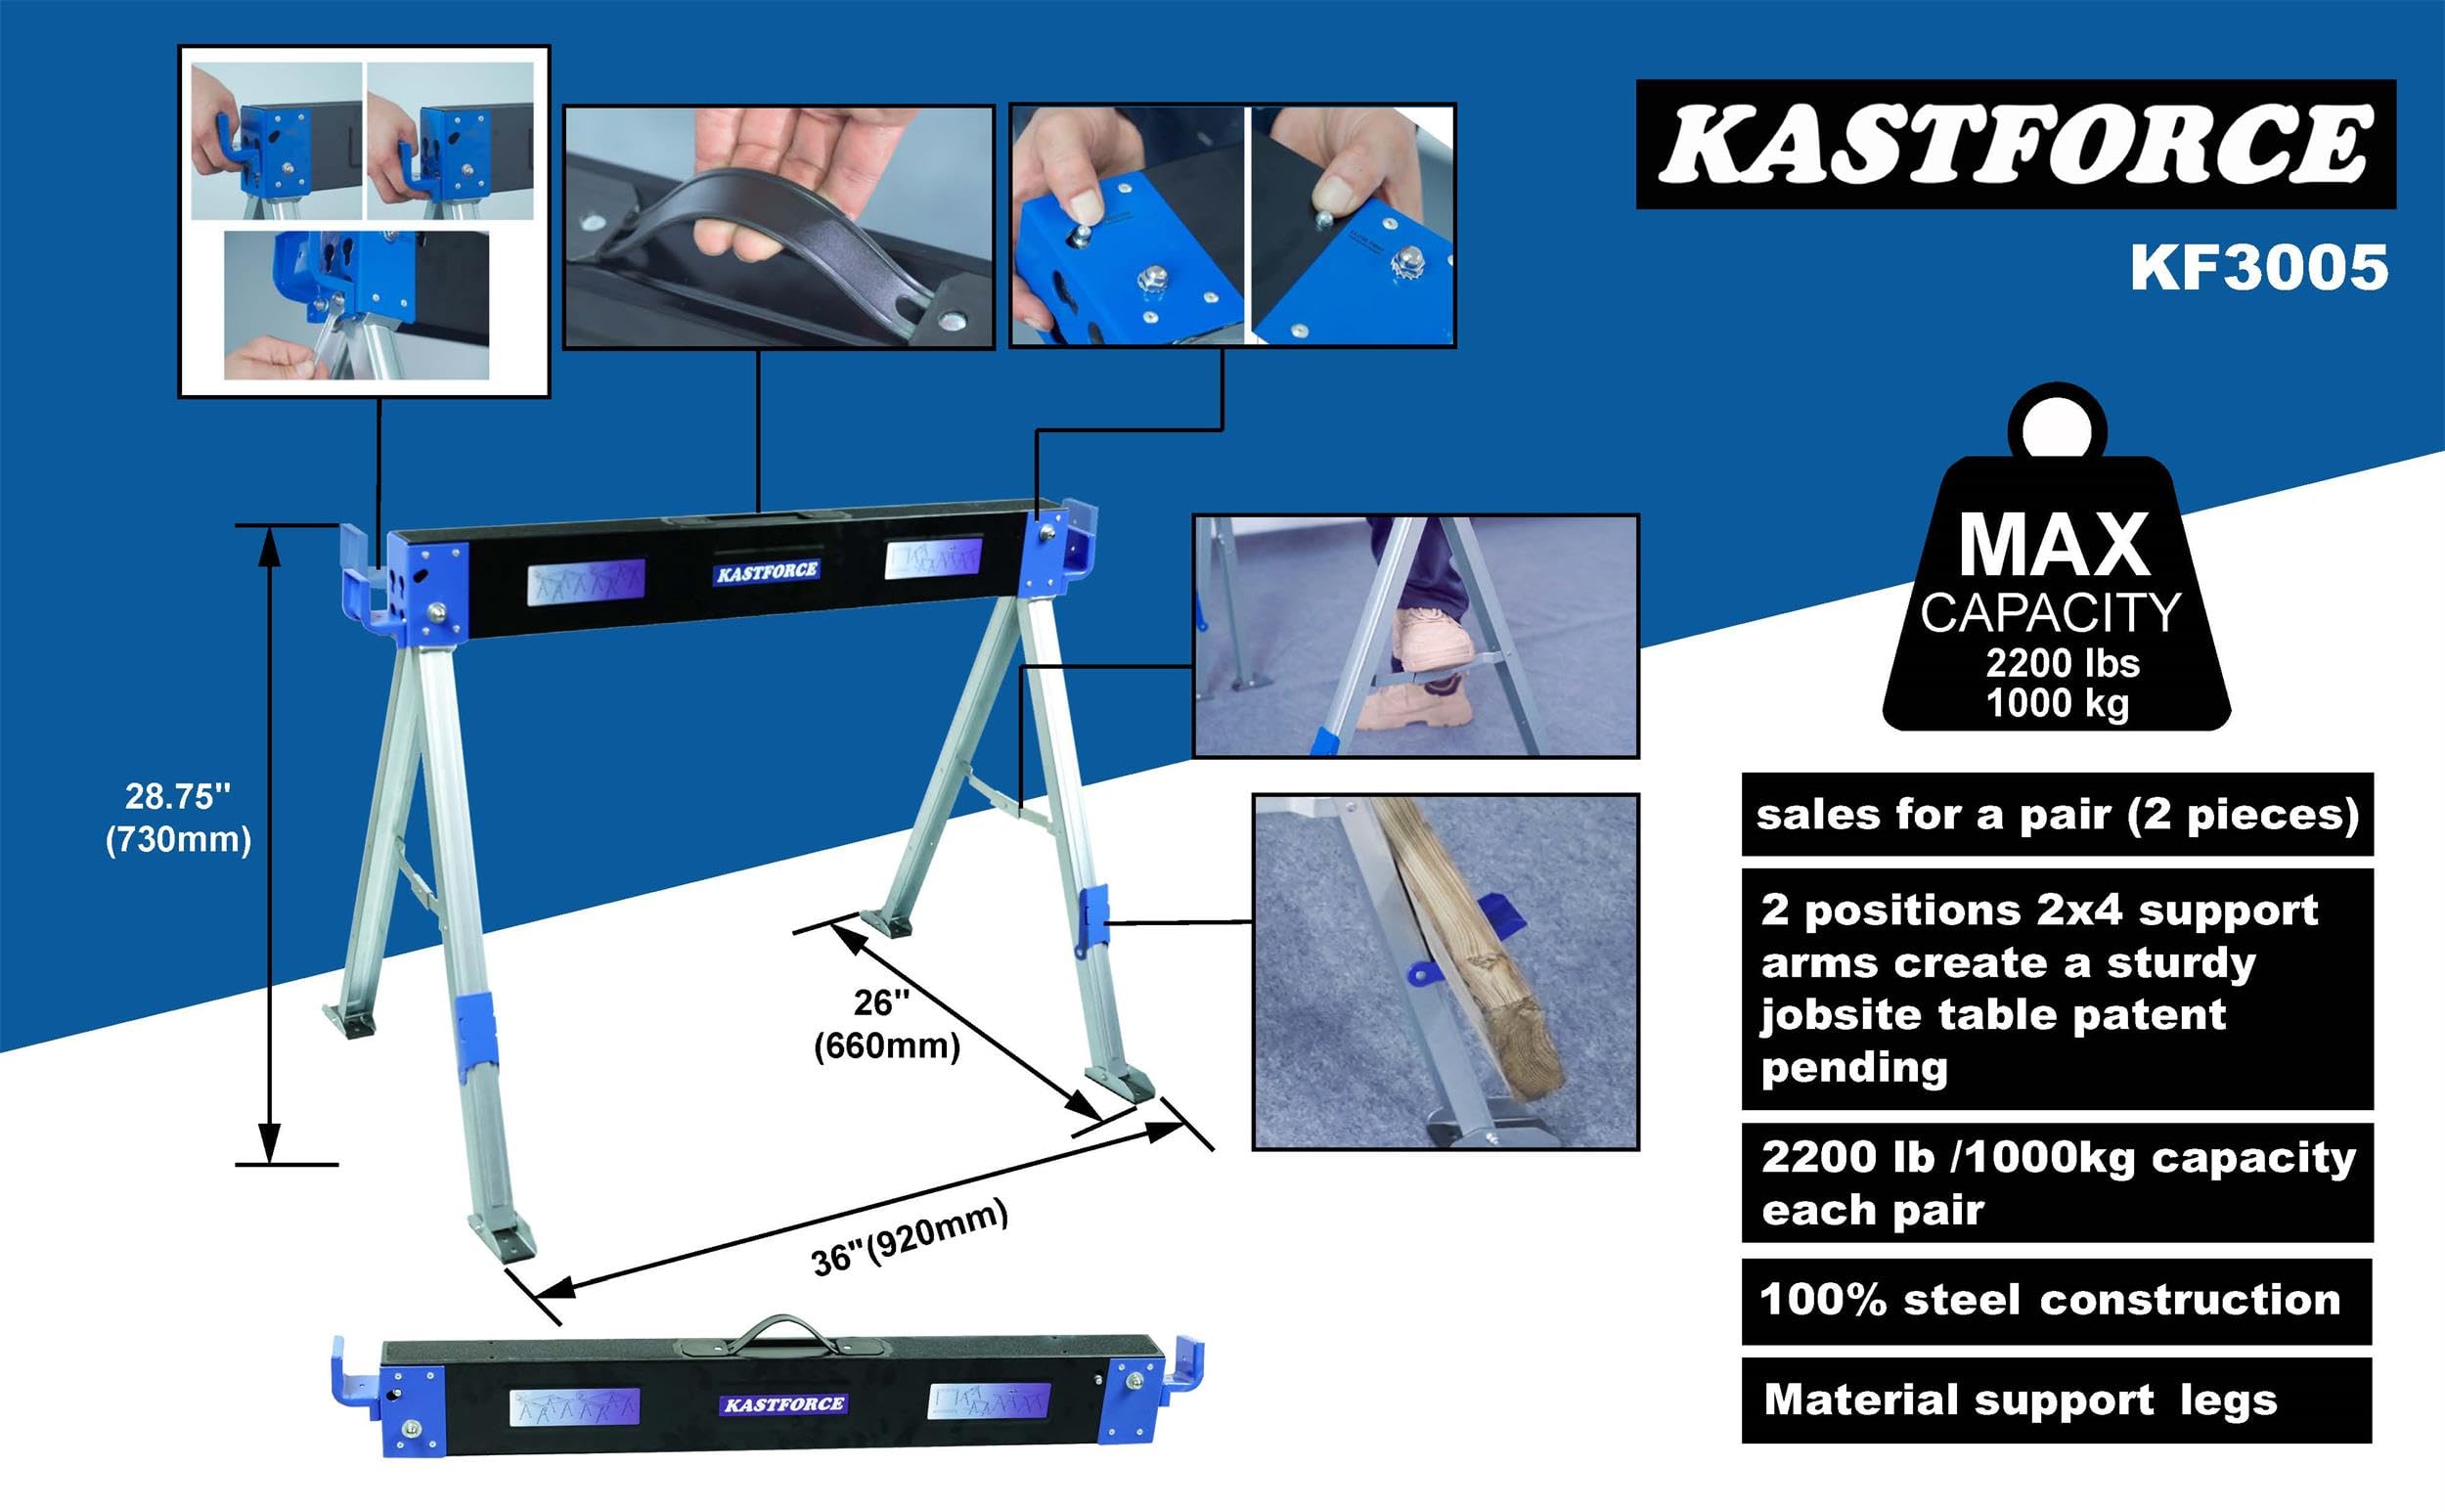 KASTFORCE Folding Sawhorse 2200 lb /1000kg capacity Heavy Duty Jobsite Table Stand with Folding Legs Twin Pack KF3005